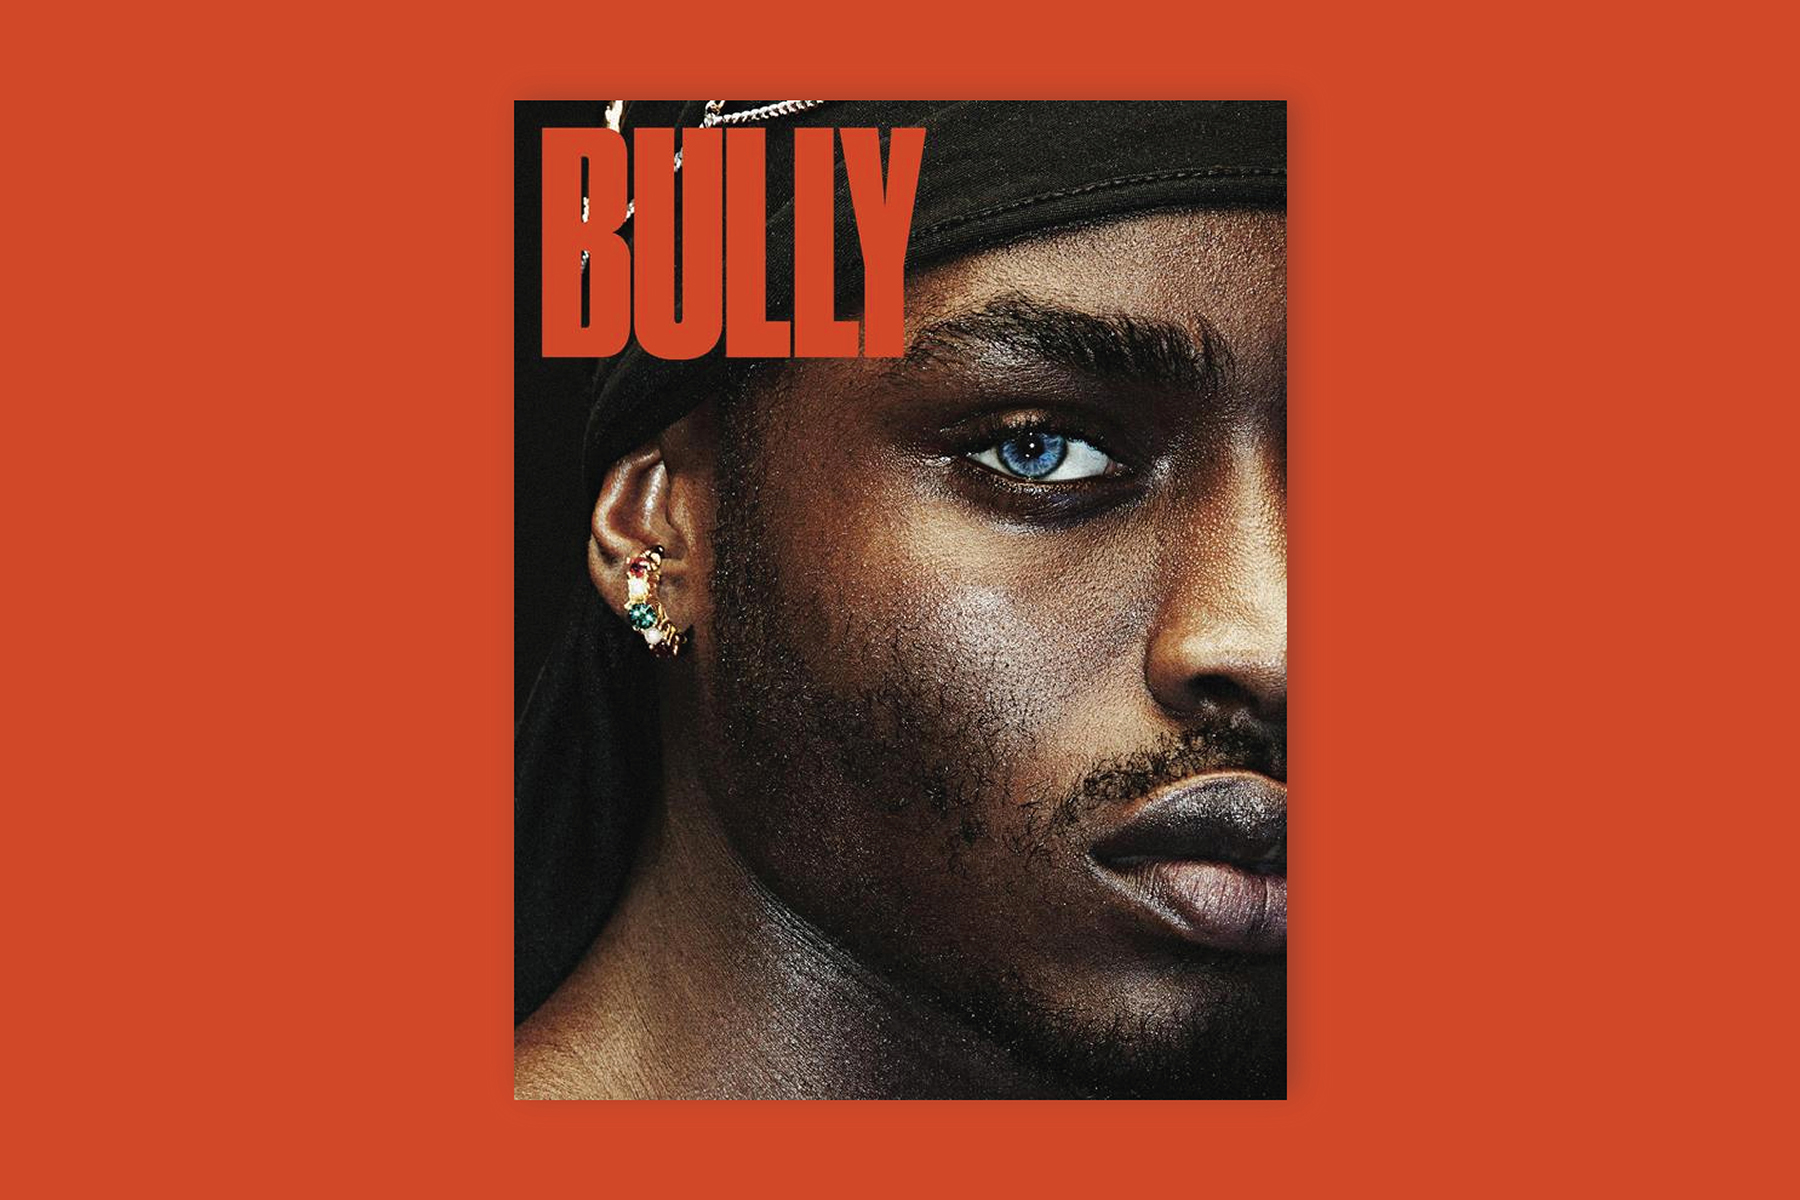 Bully Magazine by Bobby Bowen featuring Hardware by Ron Wan with Chris, Christy, and Takuma in Hwyl Eau de Parfum by Aesop Skincare and Barnabe Fillion